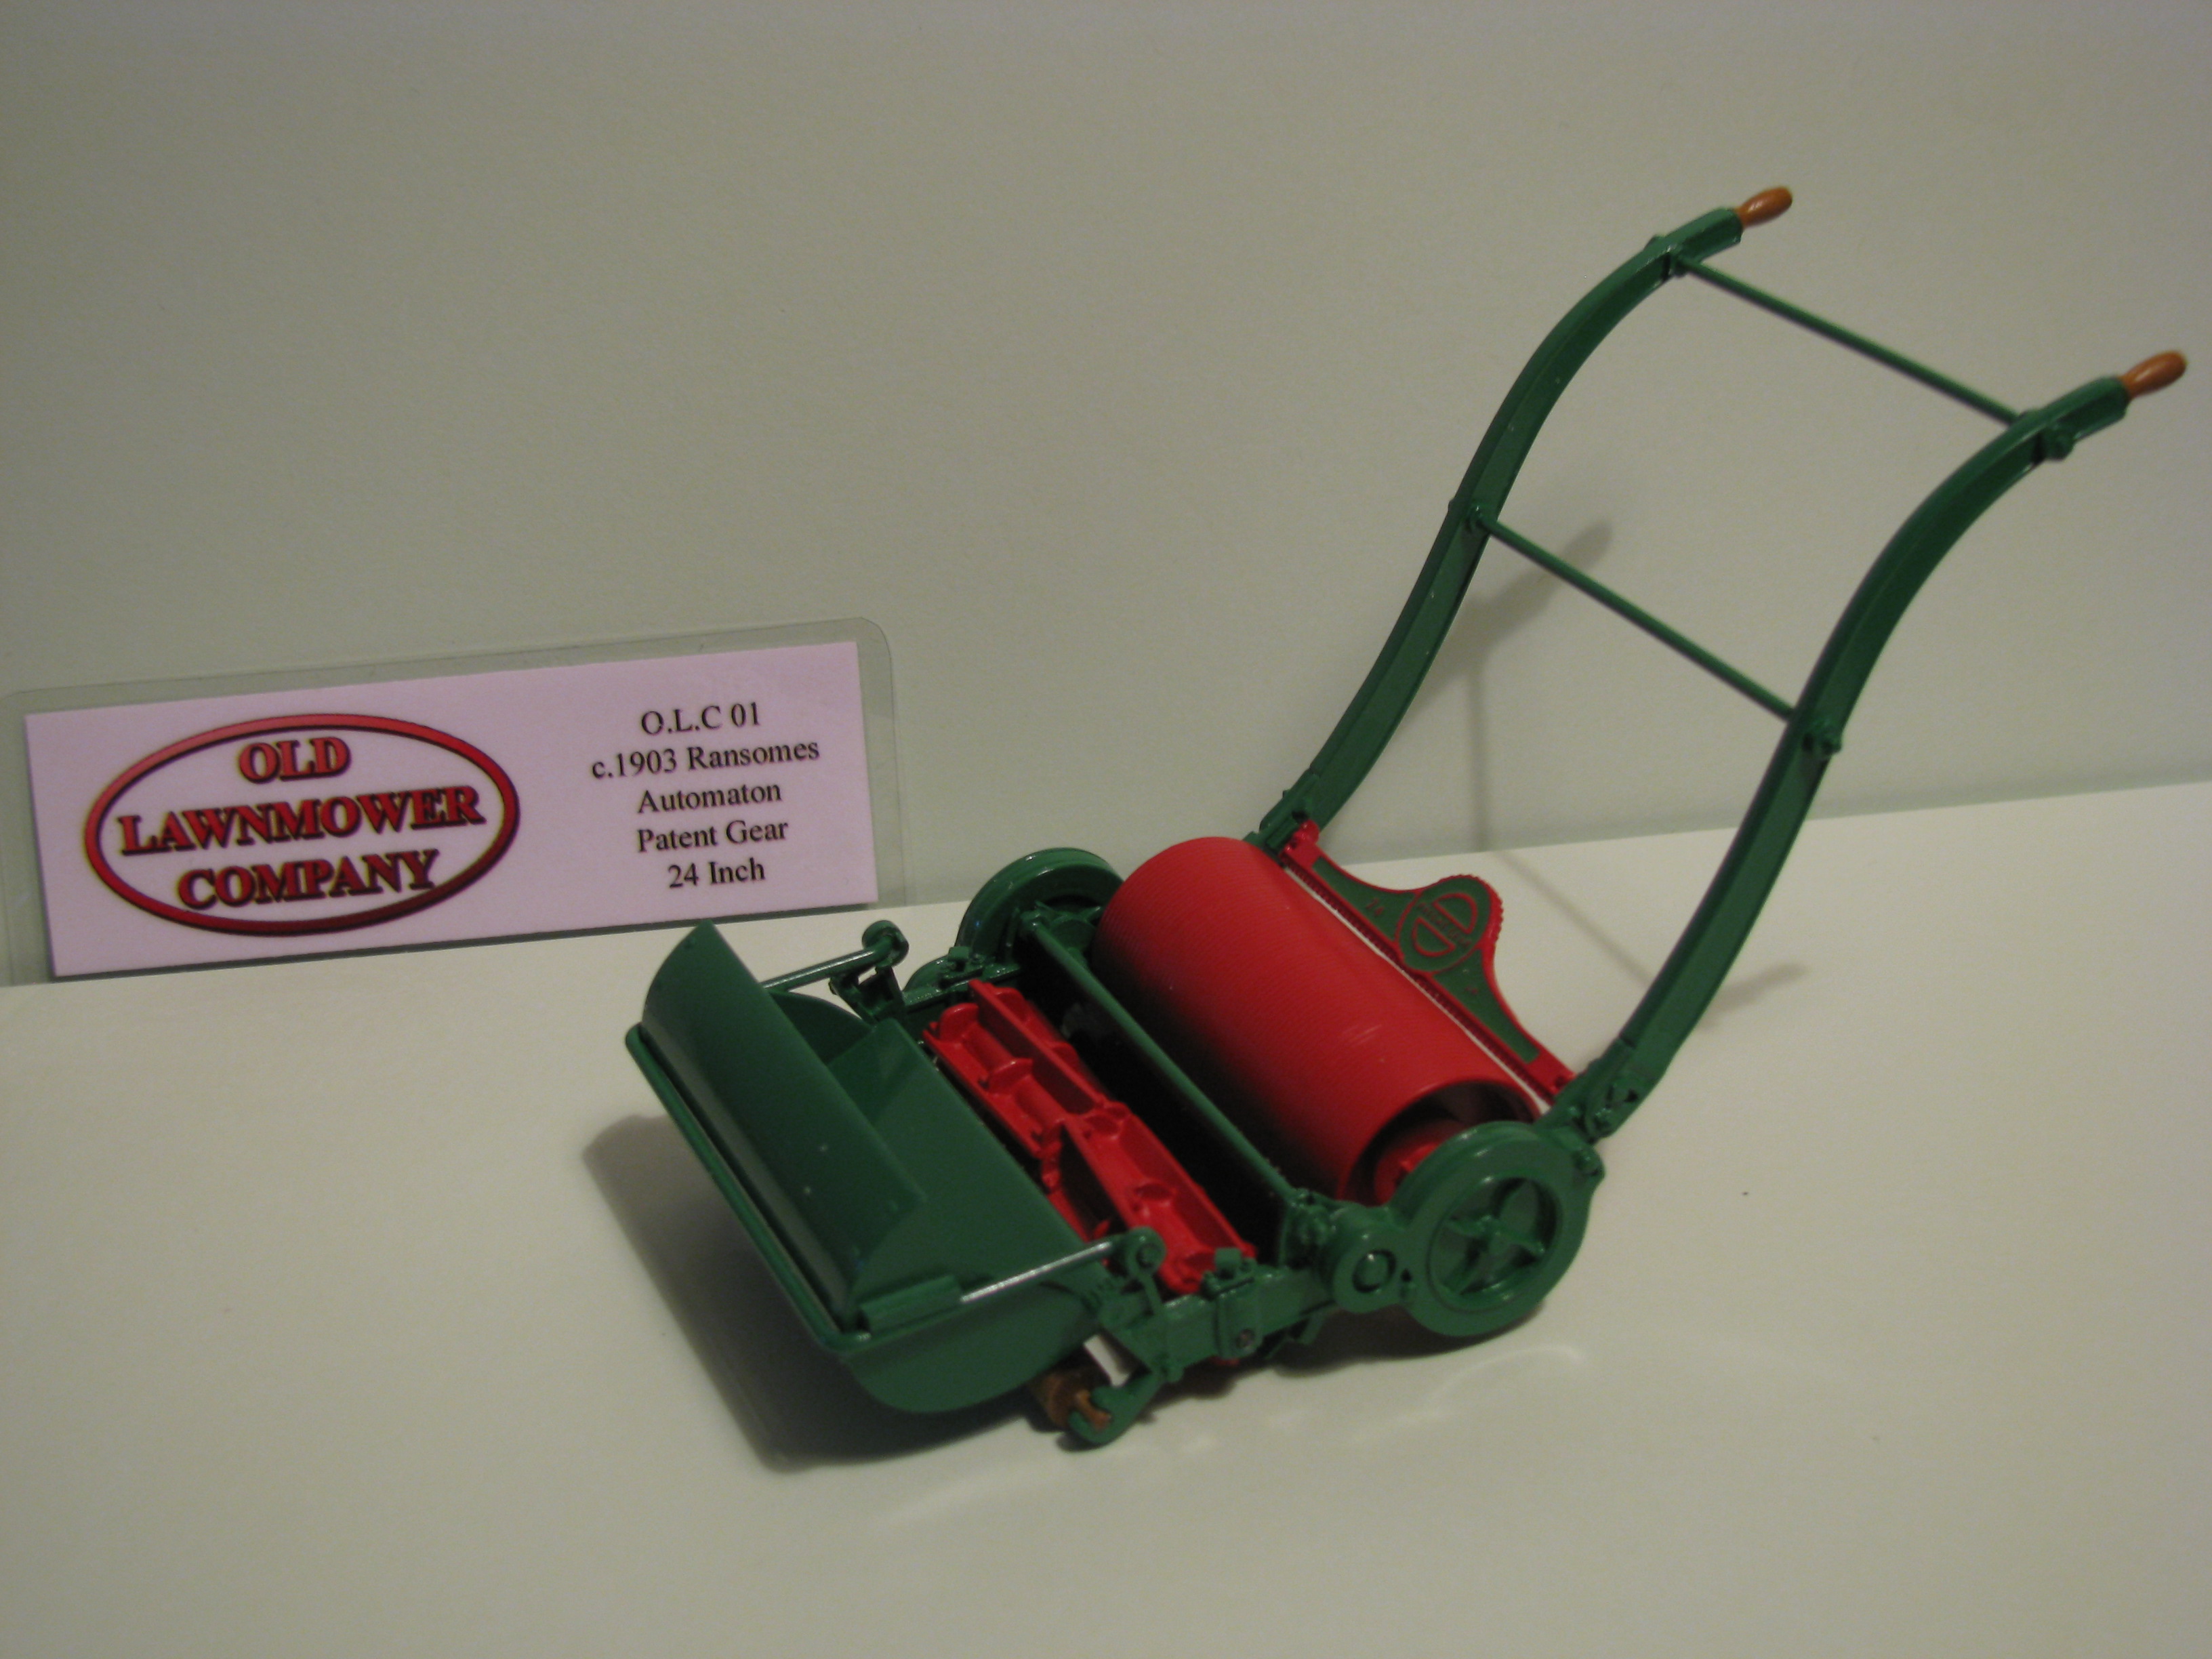 Model of my Ransomes Automaton Patent Gear